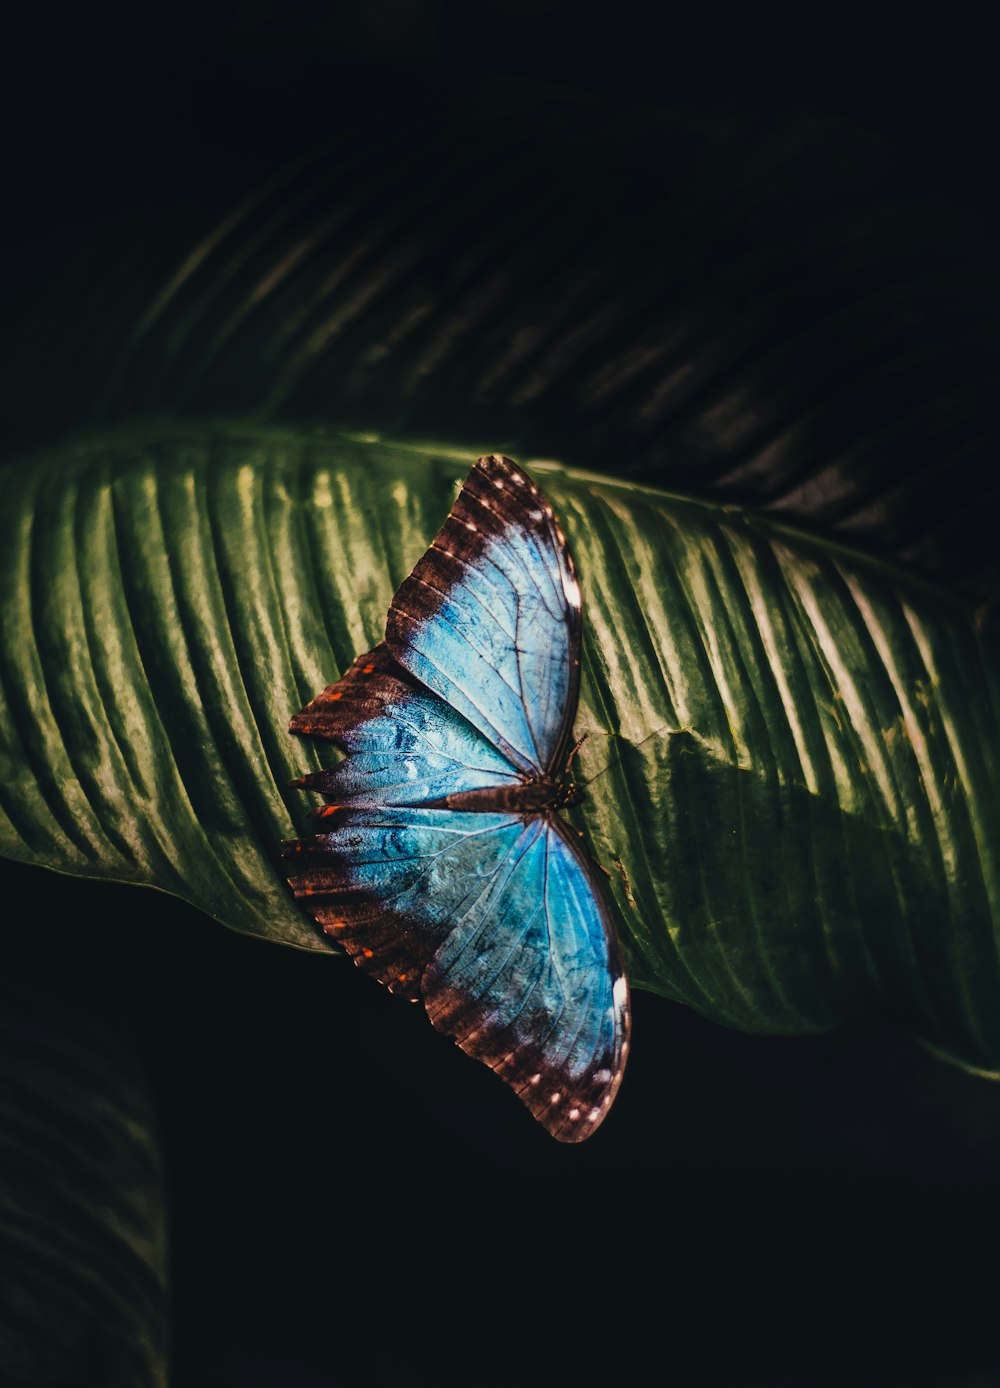 Flying Butterfly Pictures  Download Free Images on Unsplash